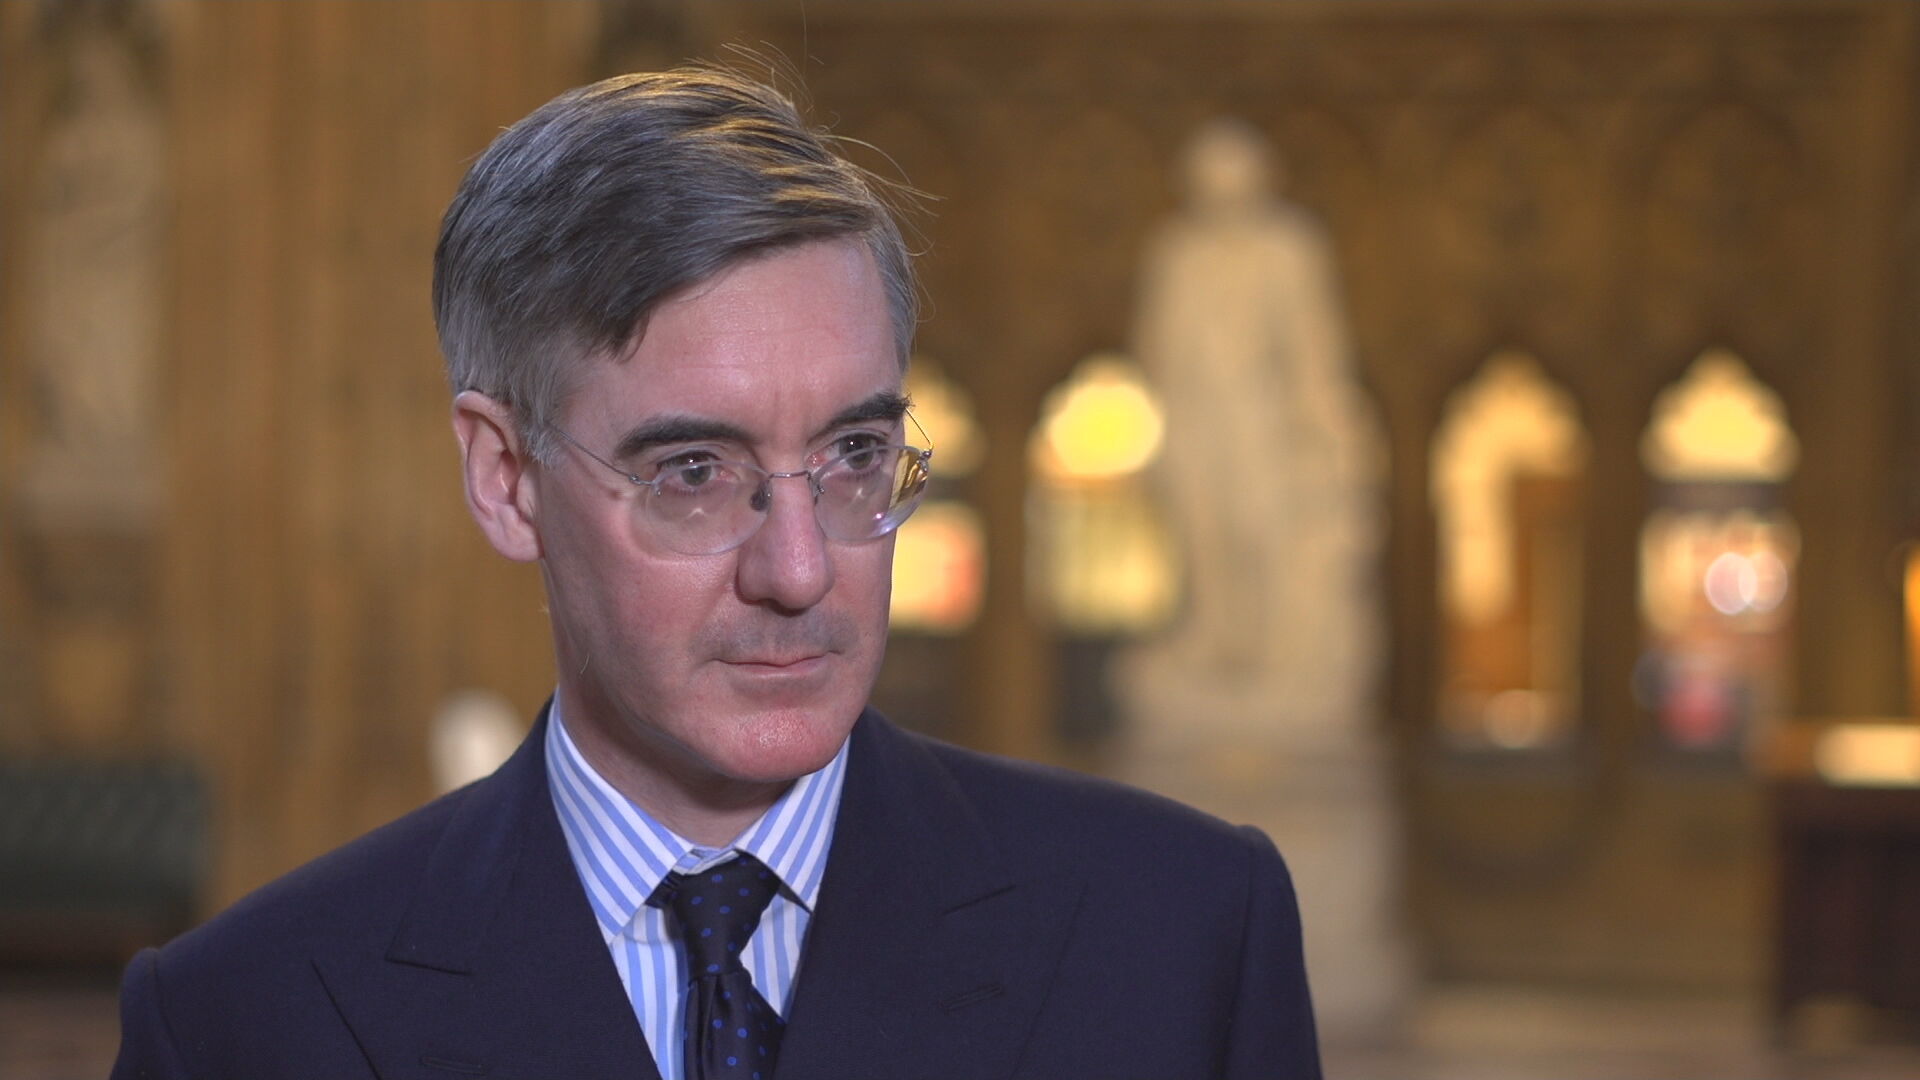 Jacob Rees-Mogg described Ross as a 'lightweight'. (ITV)